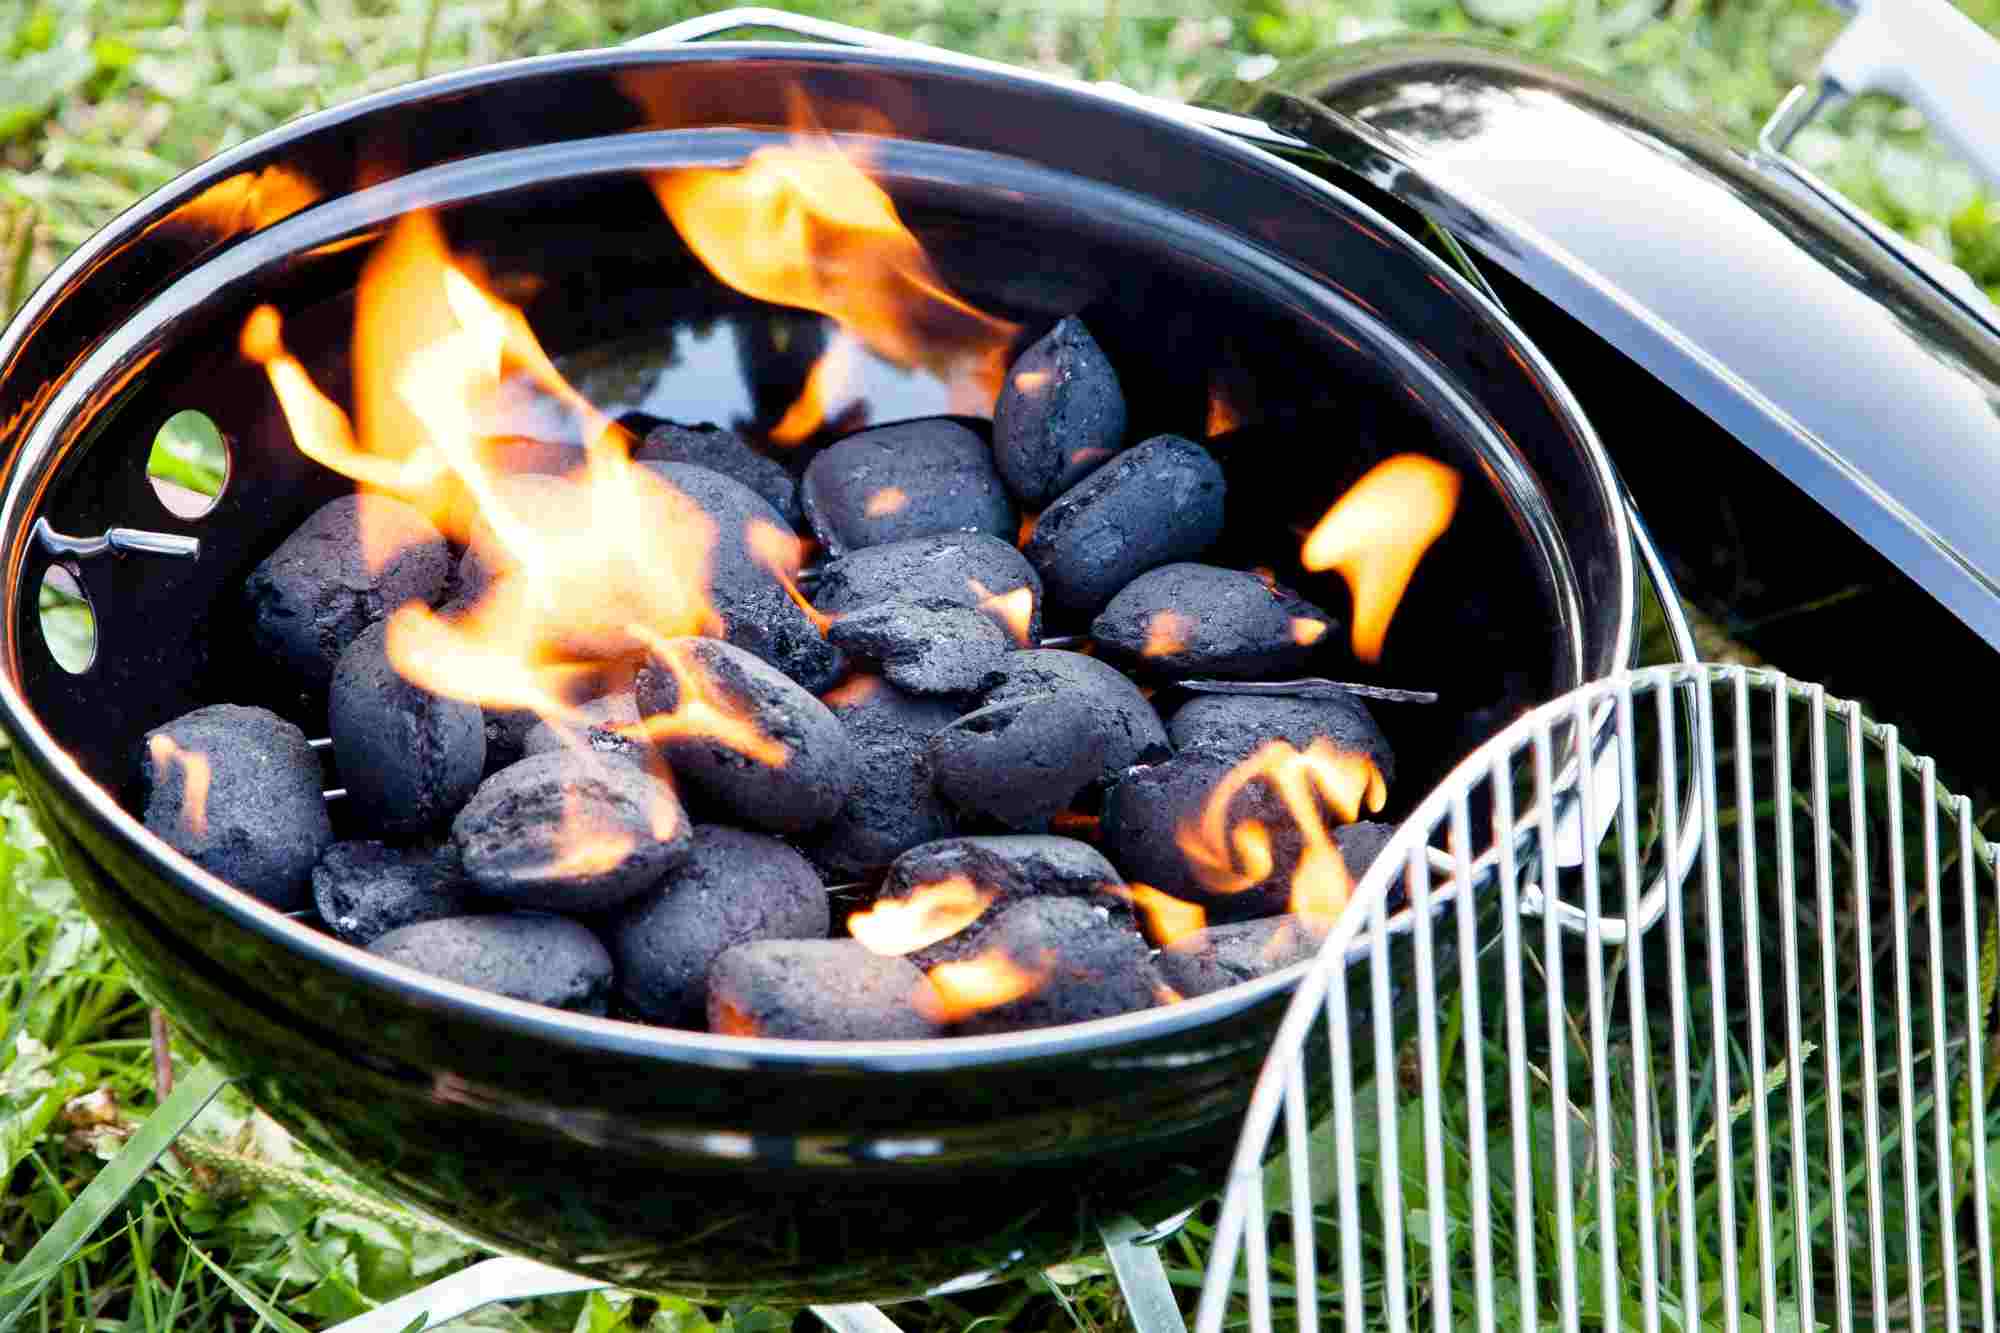 A black charcoal grill filled with coals and flames.